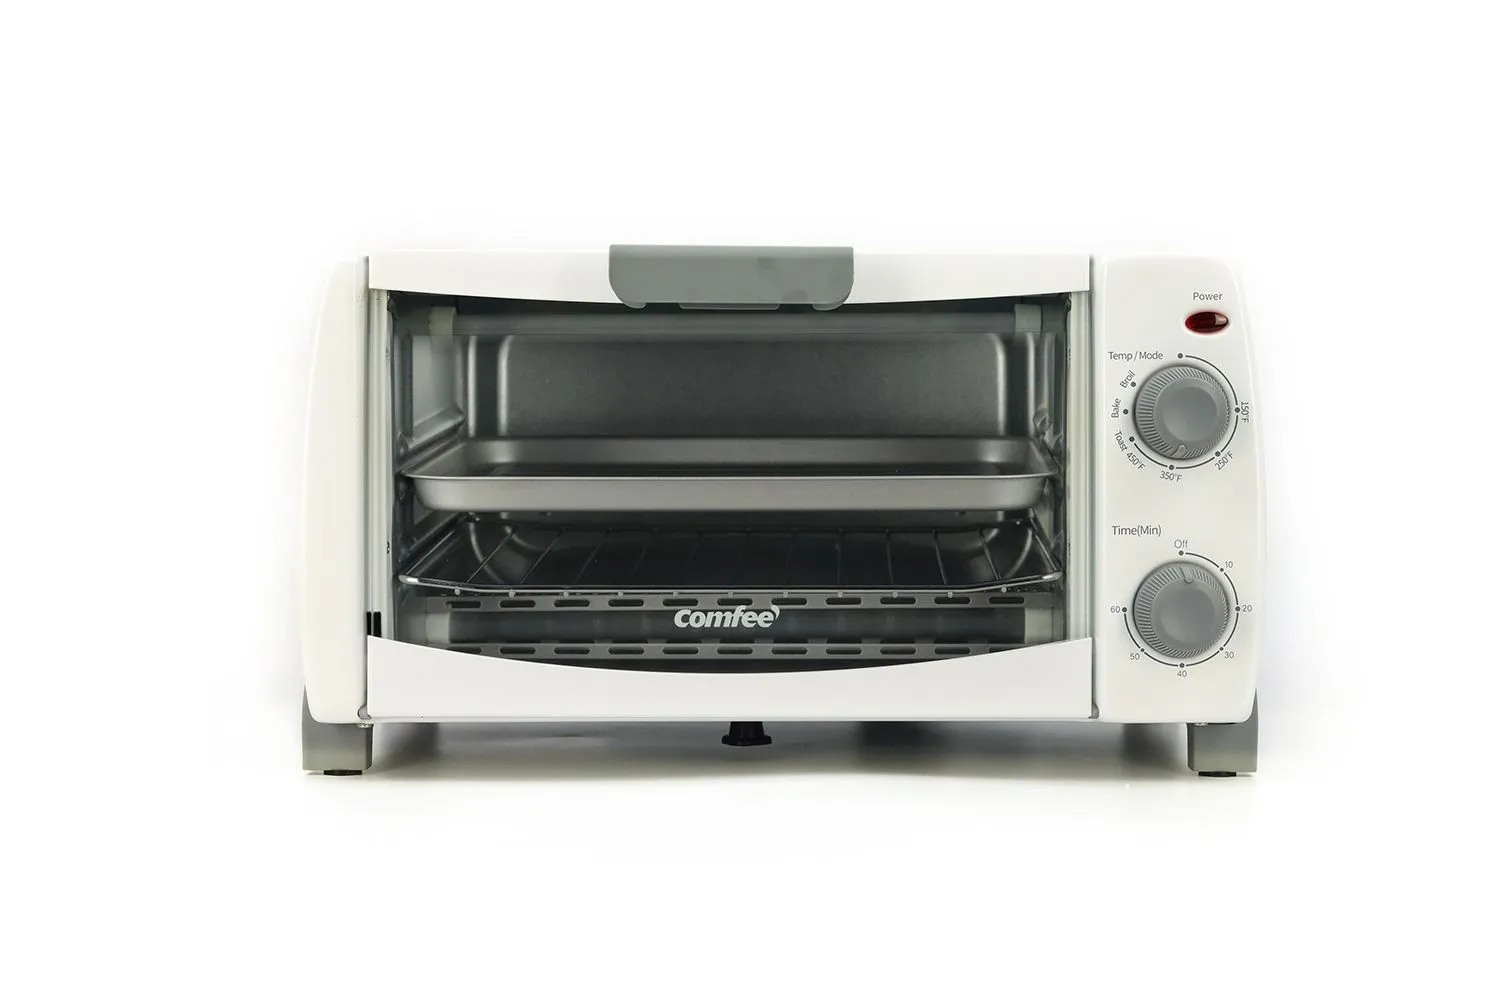 https://cdn.healthykitchen101.com/reviews/images/toaster-ovens/cl706evvo0014c688heb362p7.jpg